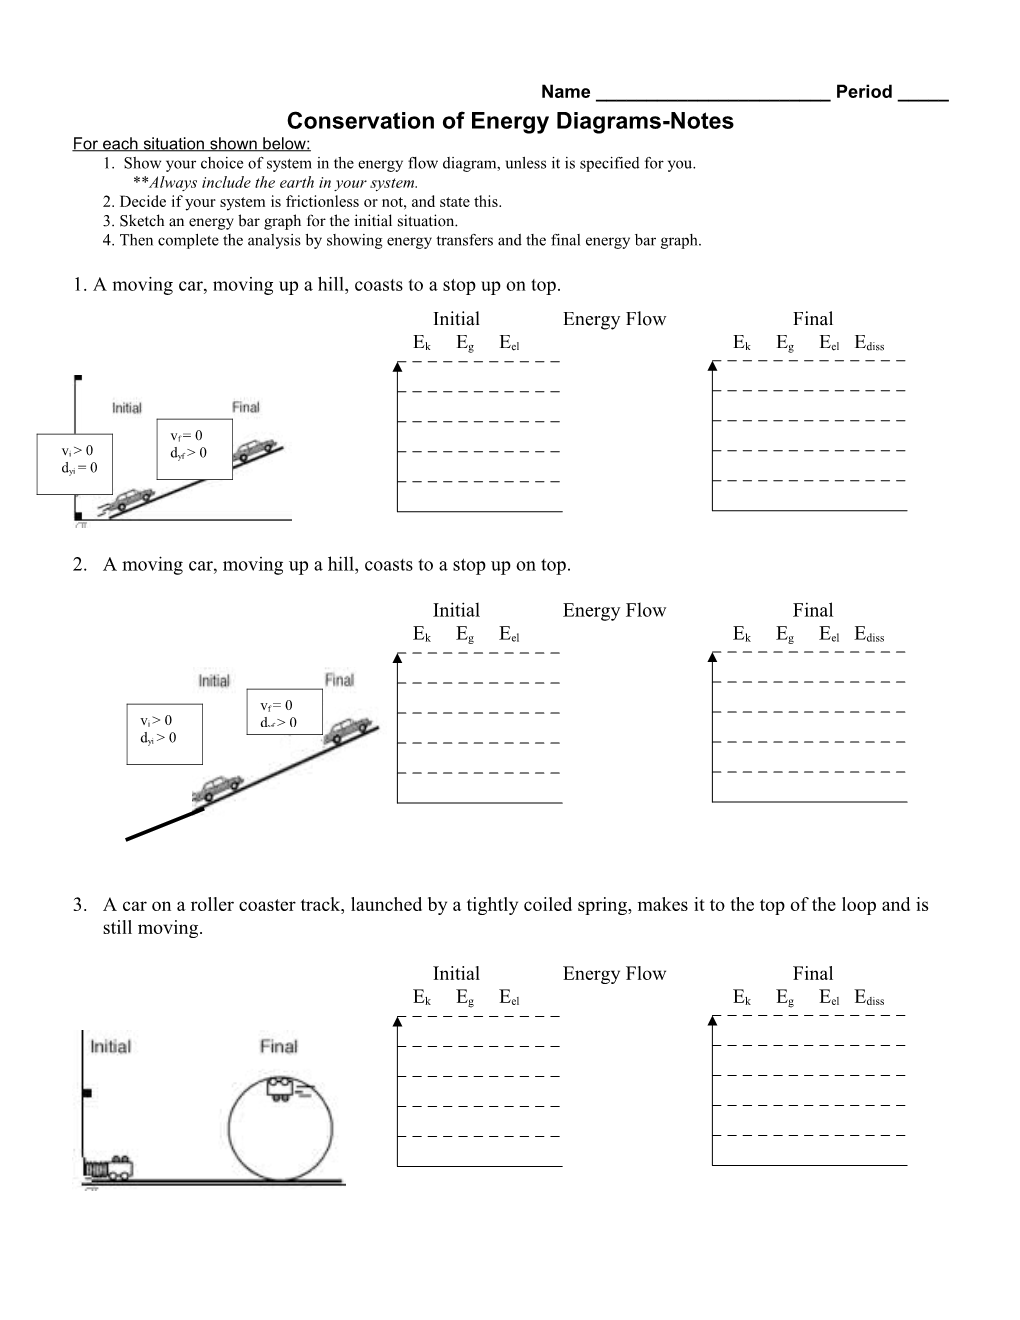 Conservation of Energy Diagrams-Notes